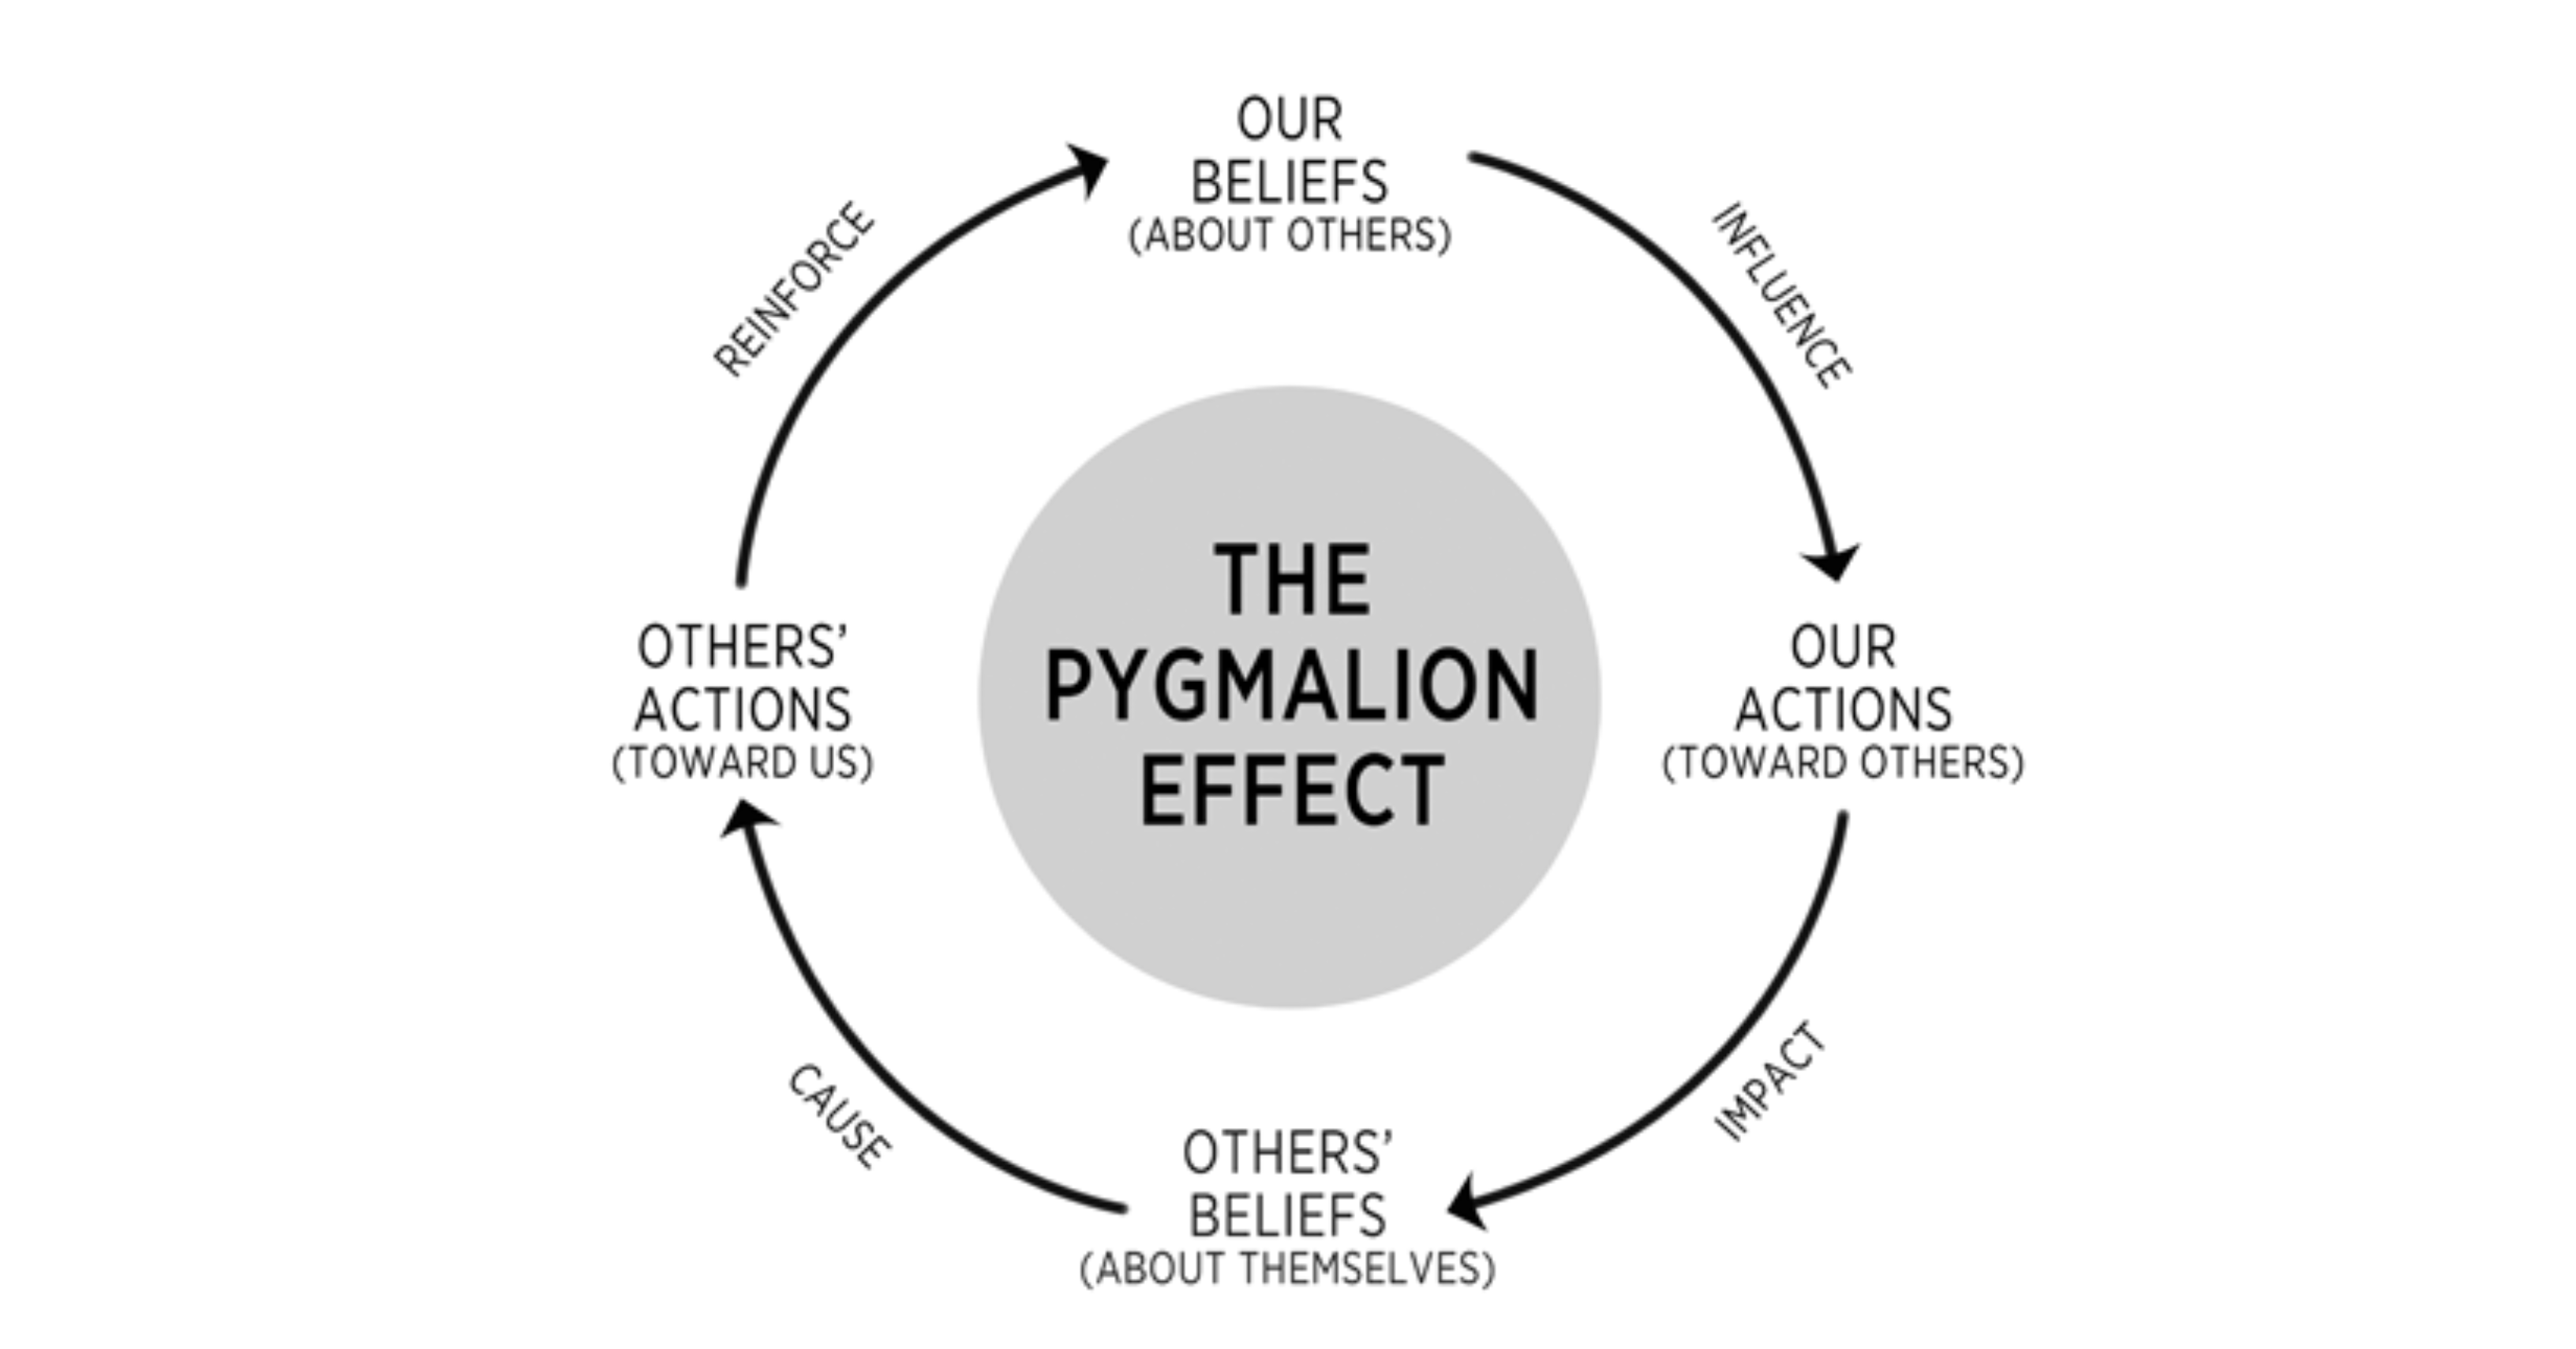 The Pygmalion Effect is a phenomenon whereby high expectations lead to great performance. It can be understand how our beliefs about another